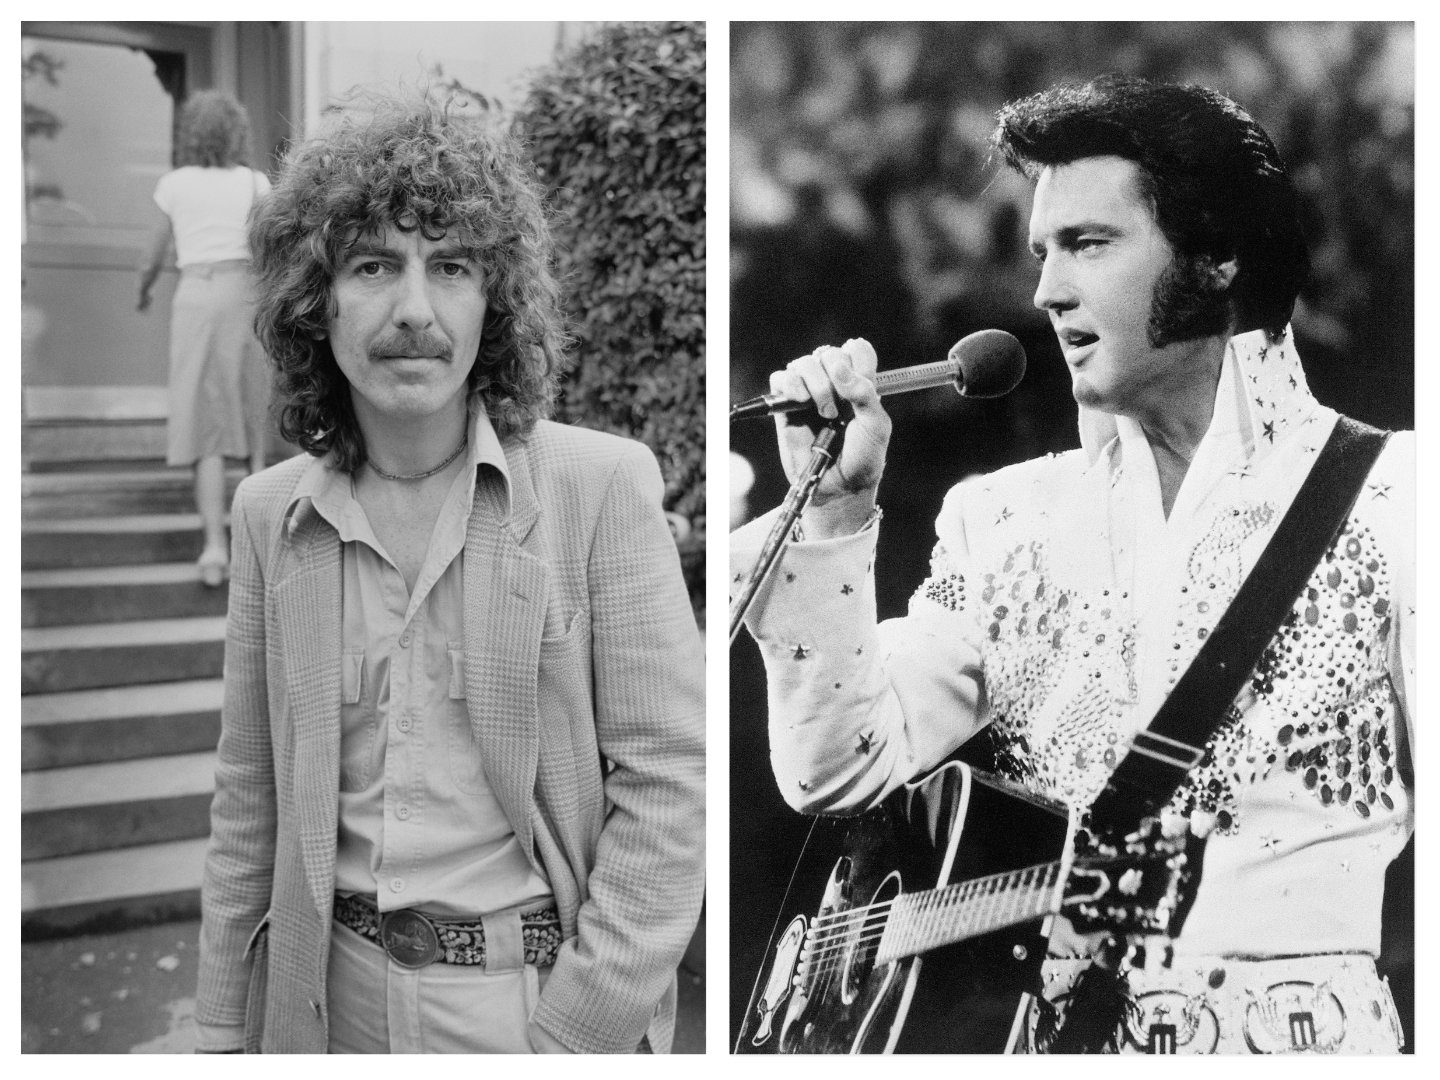 A black and white photo of George Harrison standing outside in front of stairs. Elvis holds a microphone and has a guitar across his chest.